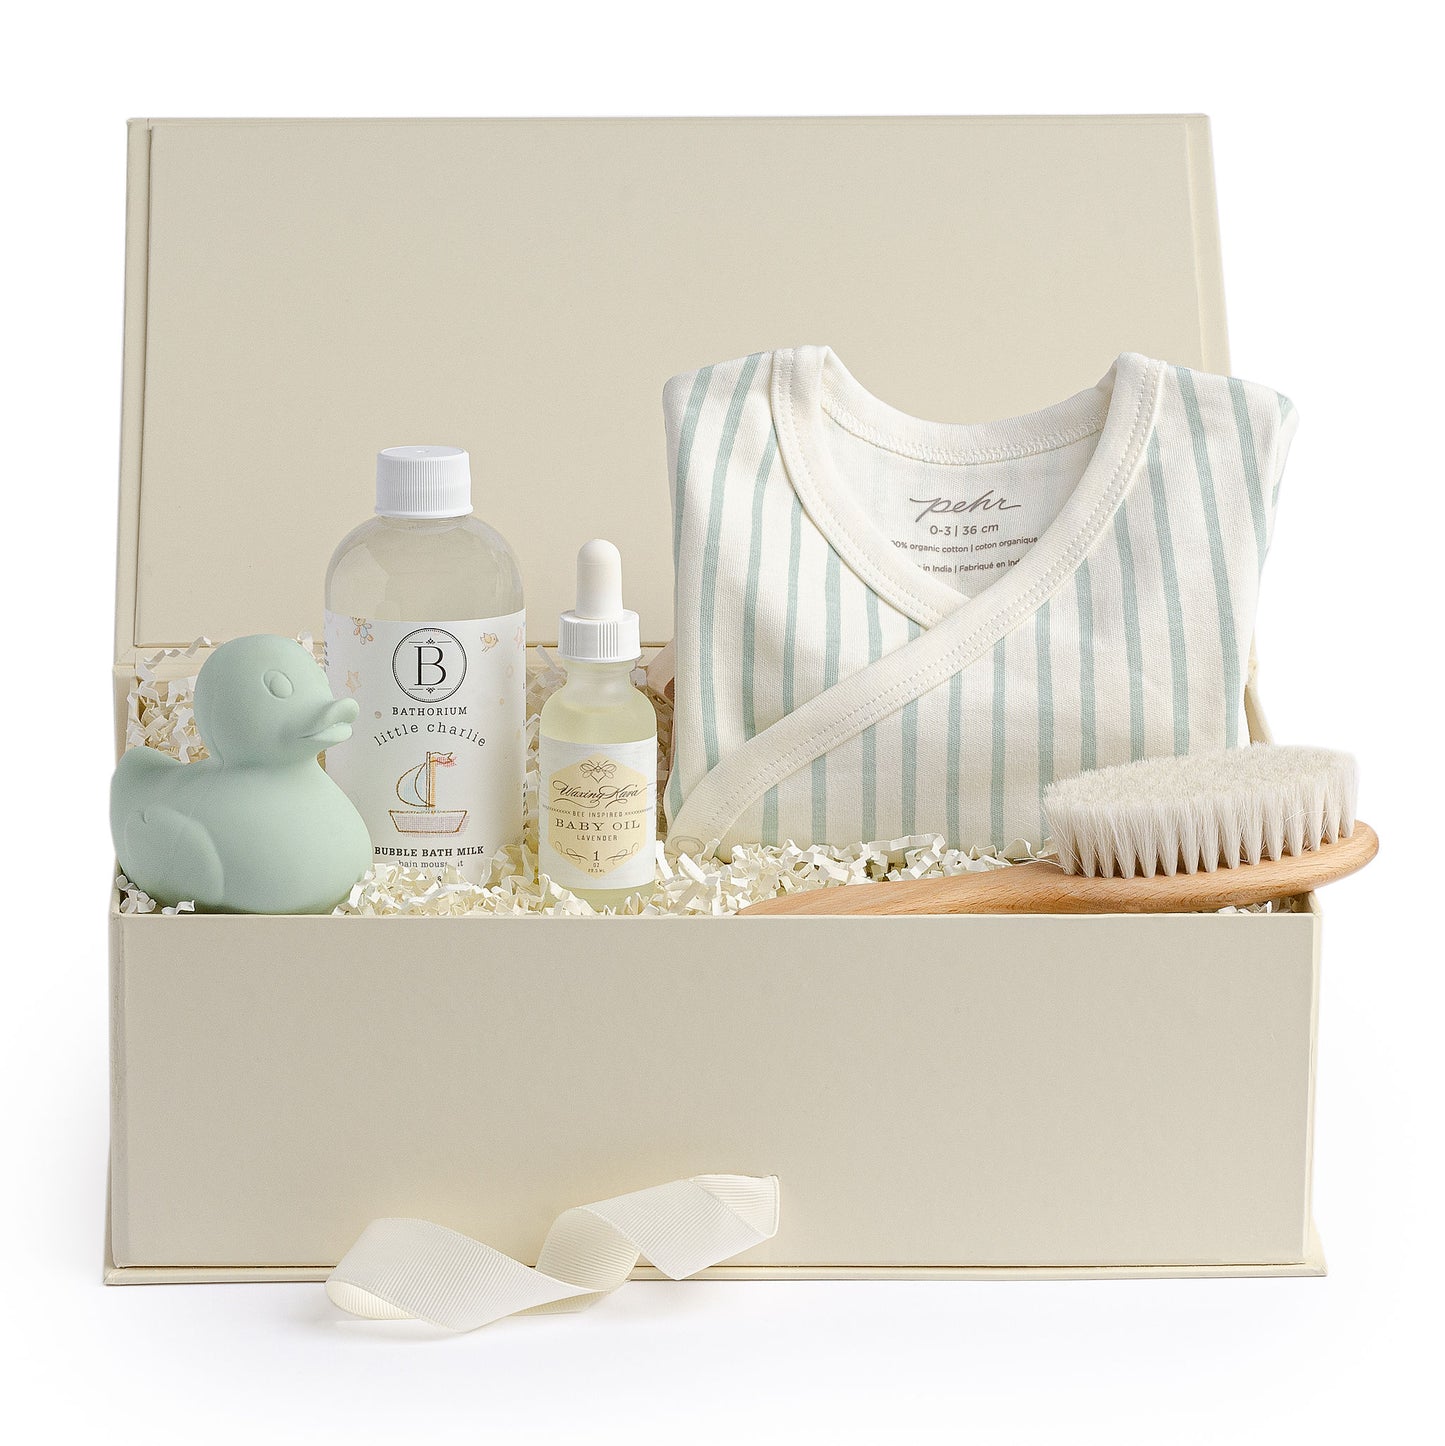 Anna & Amy baby bath gift box filled with mint rubber duck, lavender baby oil, wooden baby brush and bubble bath.